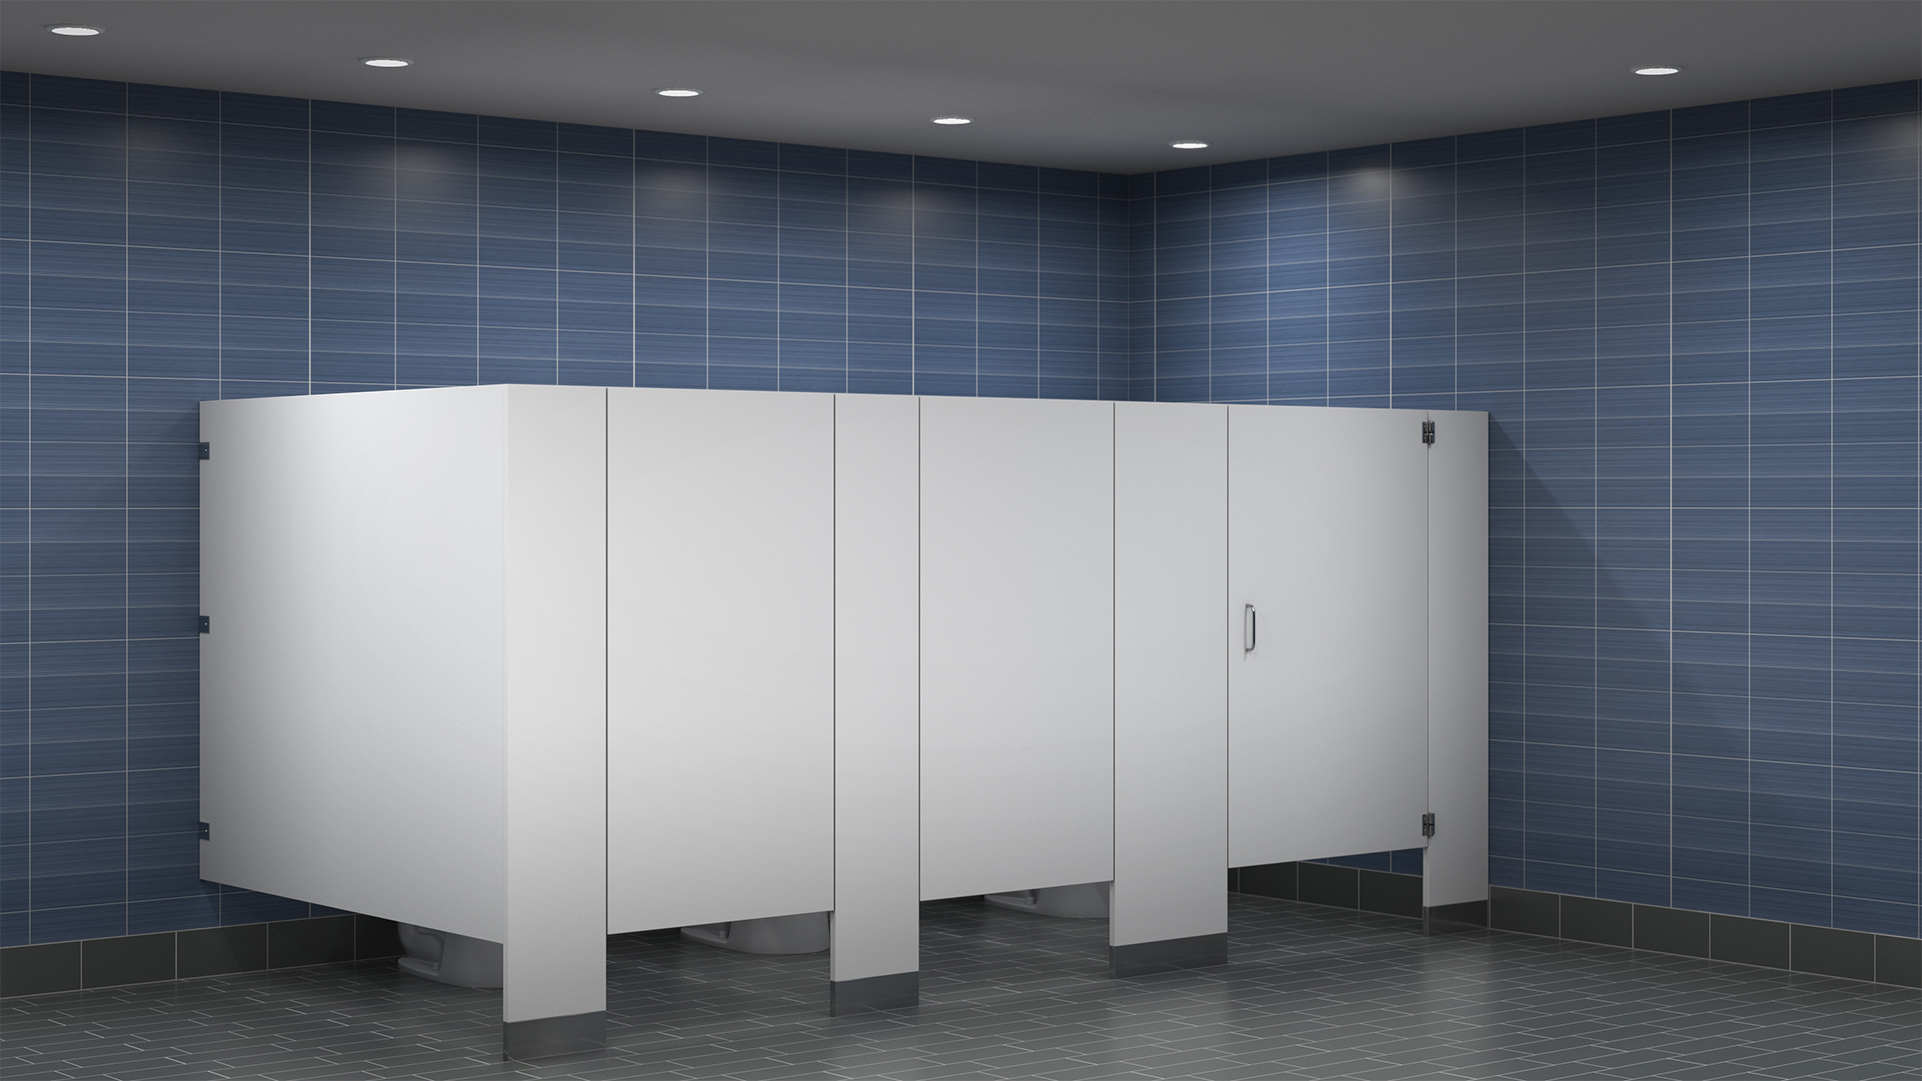 Bobrick Budget HPL Series Toilet Partitions sold by J. Laurenzo Specialties